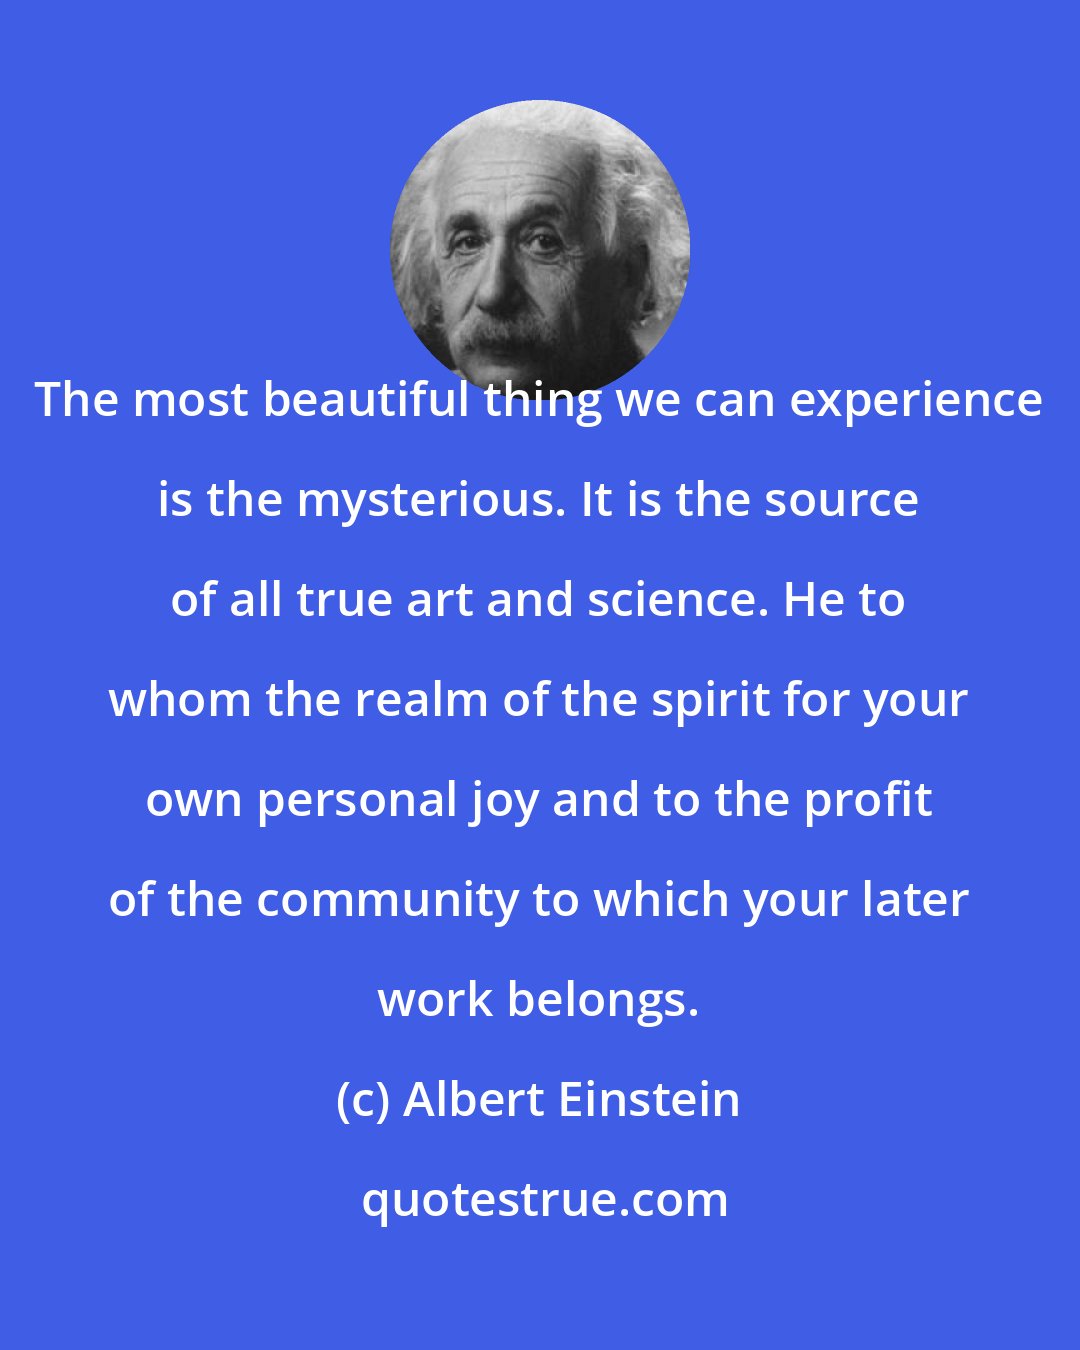 Albert Einstein: The most beautiful thing we can experience is the mysterious. It is the source of all true art and science. He to whom the realm of the spirit for your own personal joy and to the profit of the community to which your later work belongs.